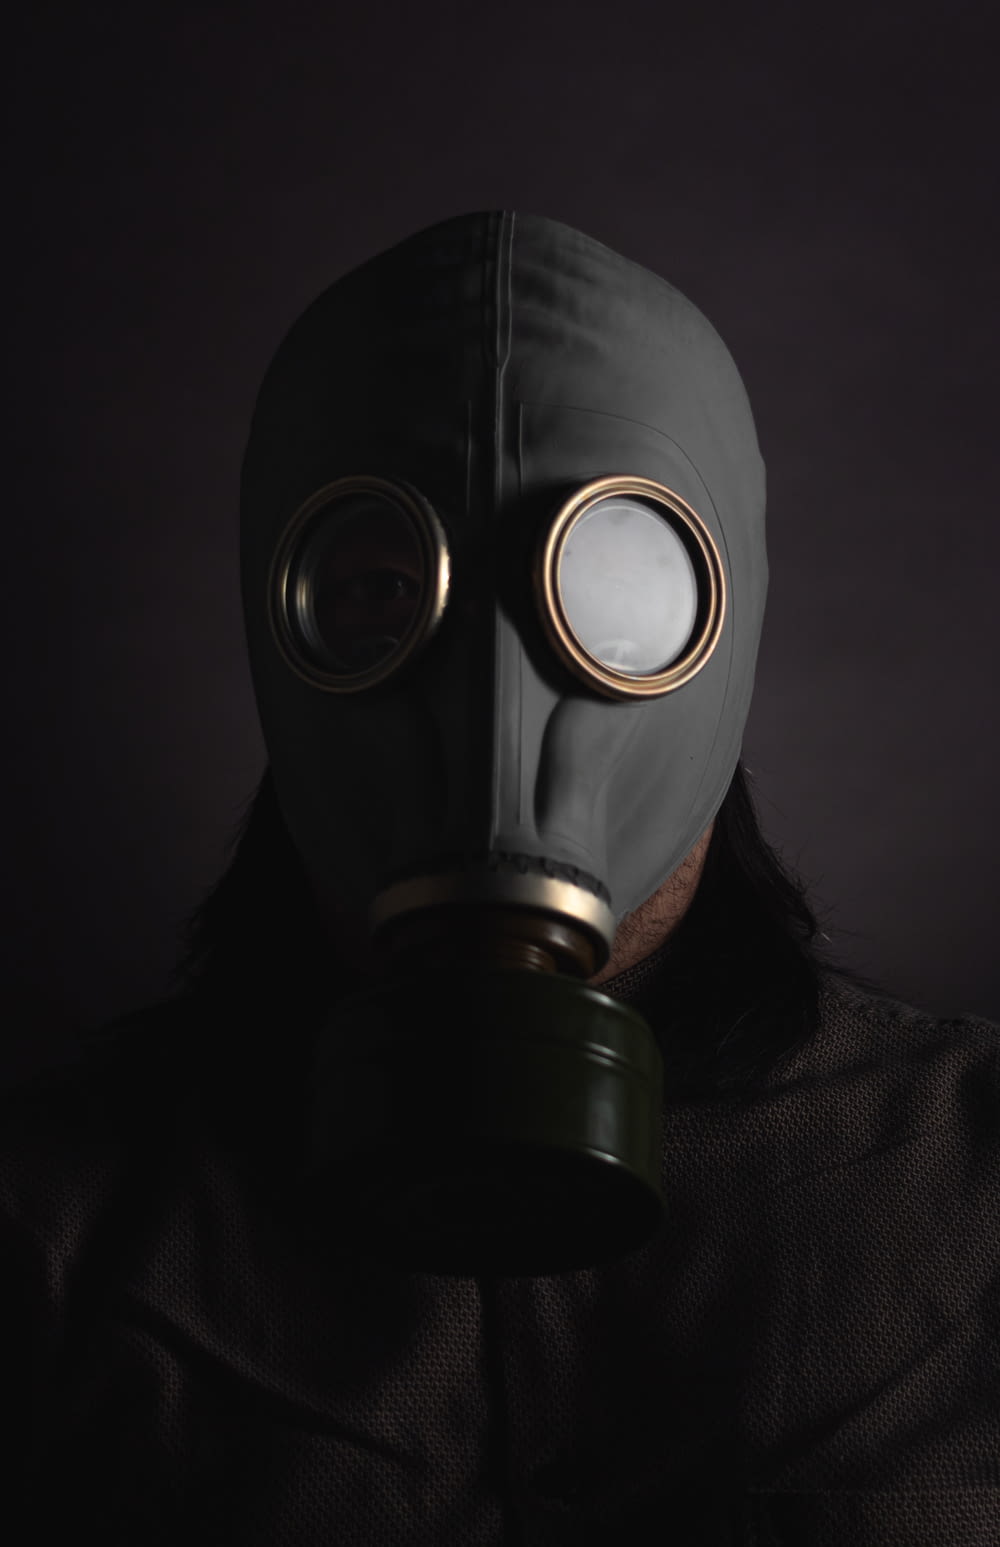 person wearing black gas mask